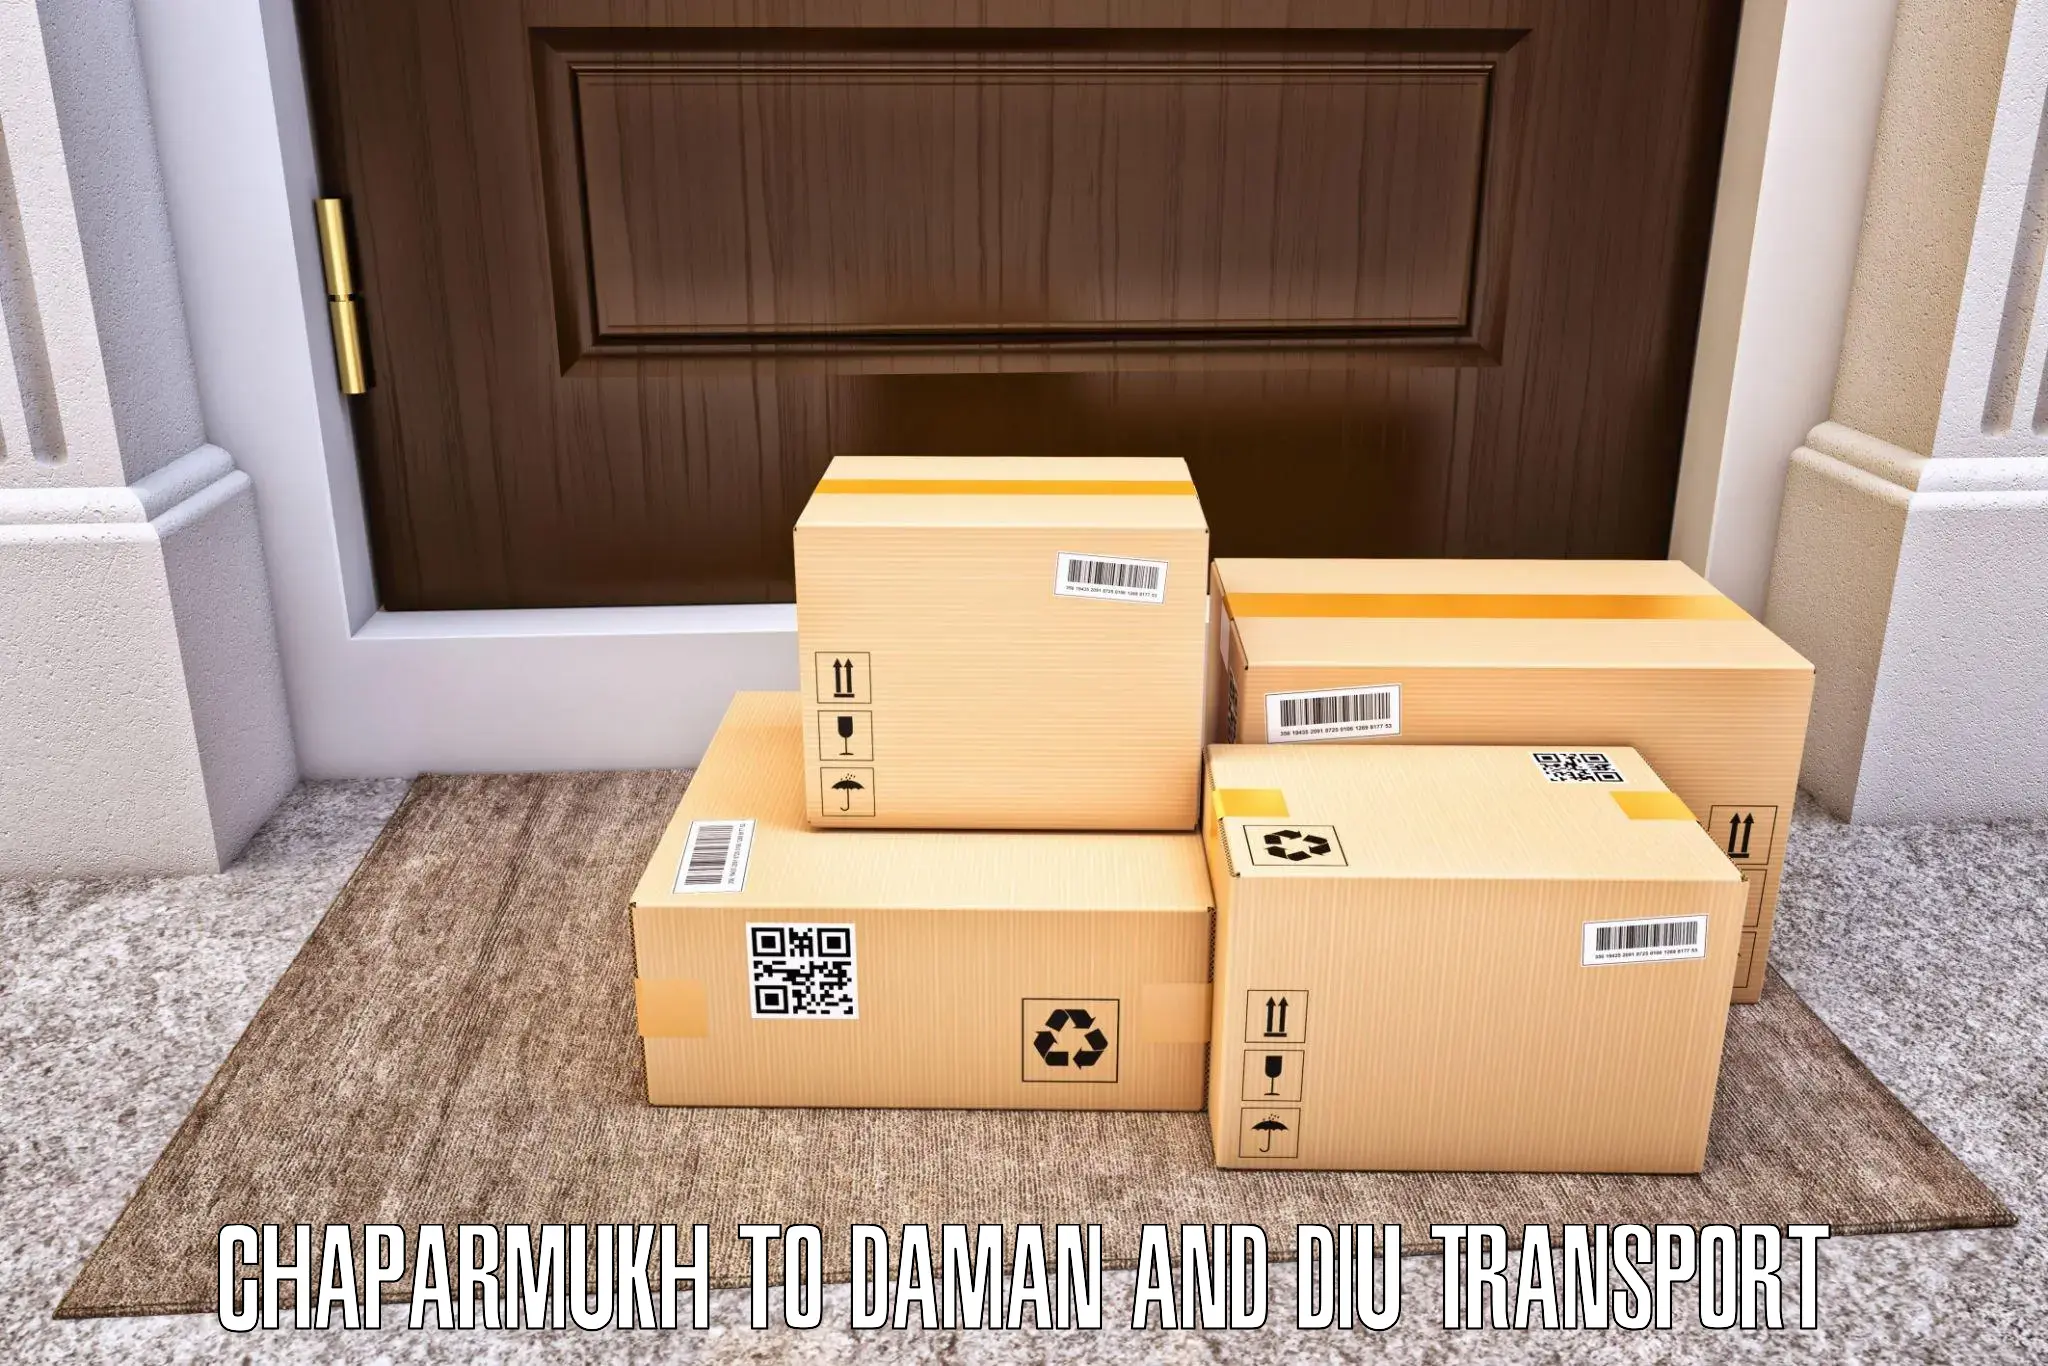 Two wheeler parcel service Chaparmukh to Diu